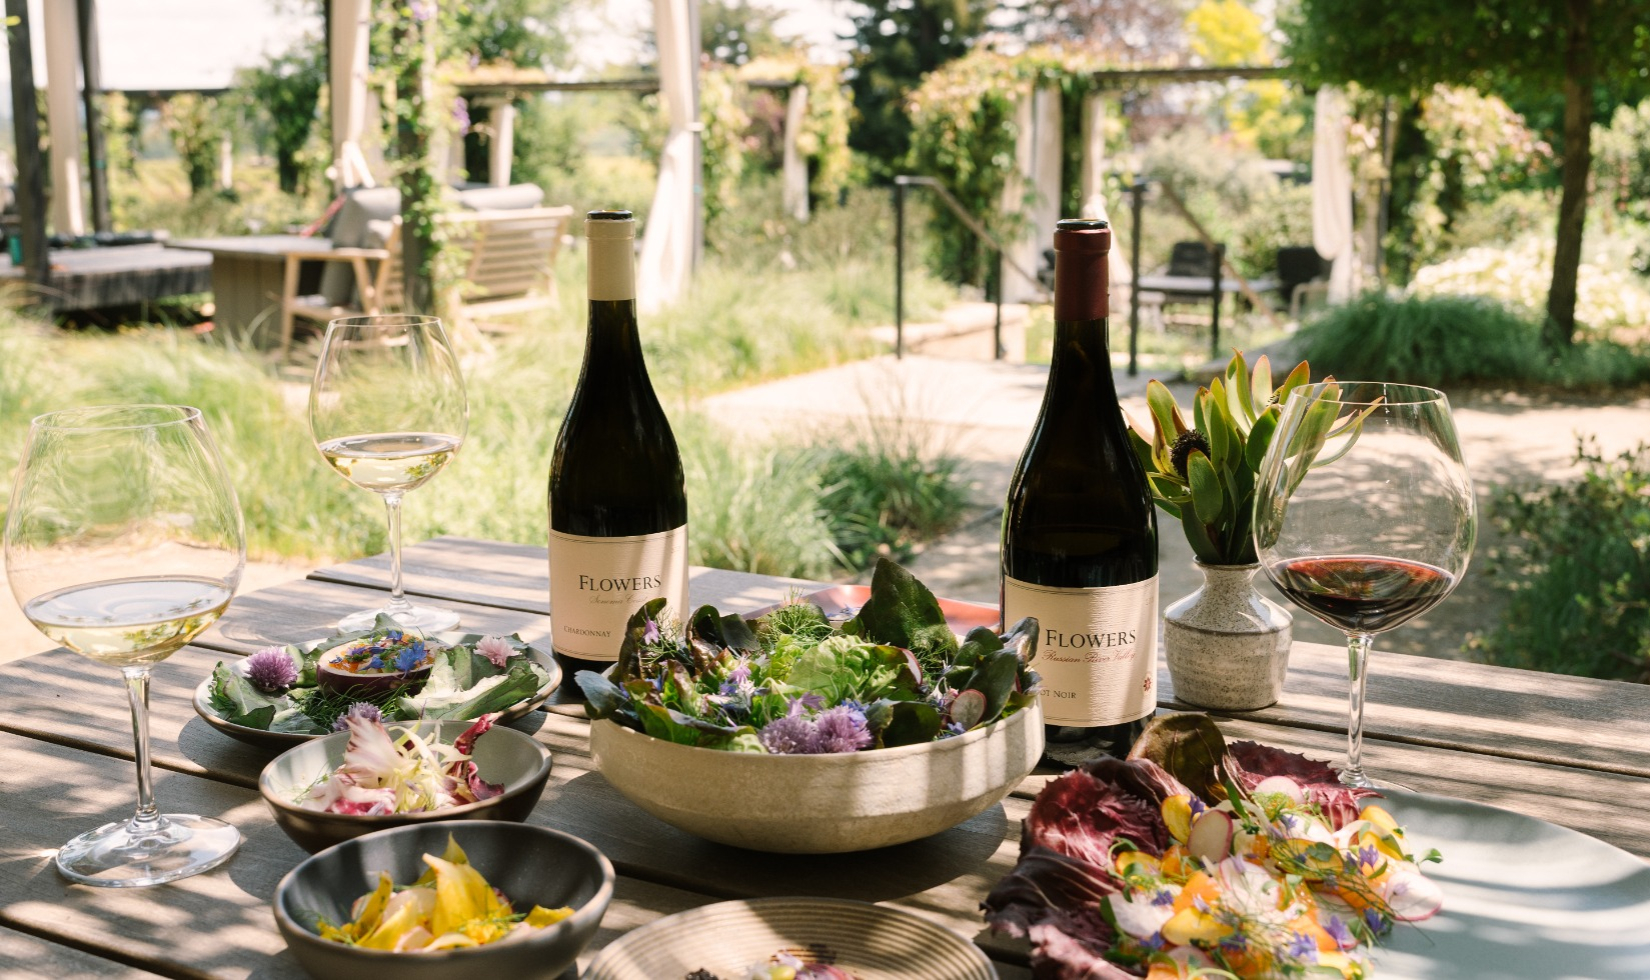 Outdoor table set with wine and food pairing at Flowers.